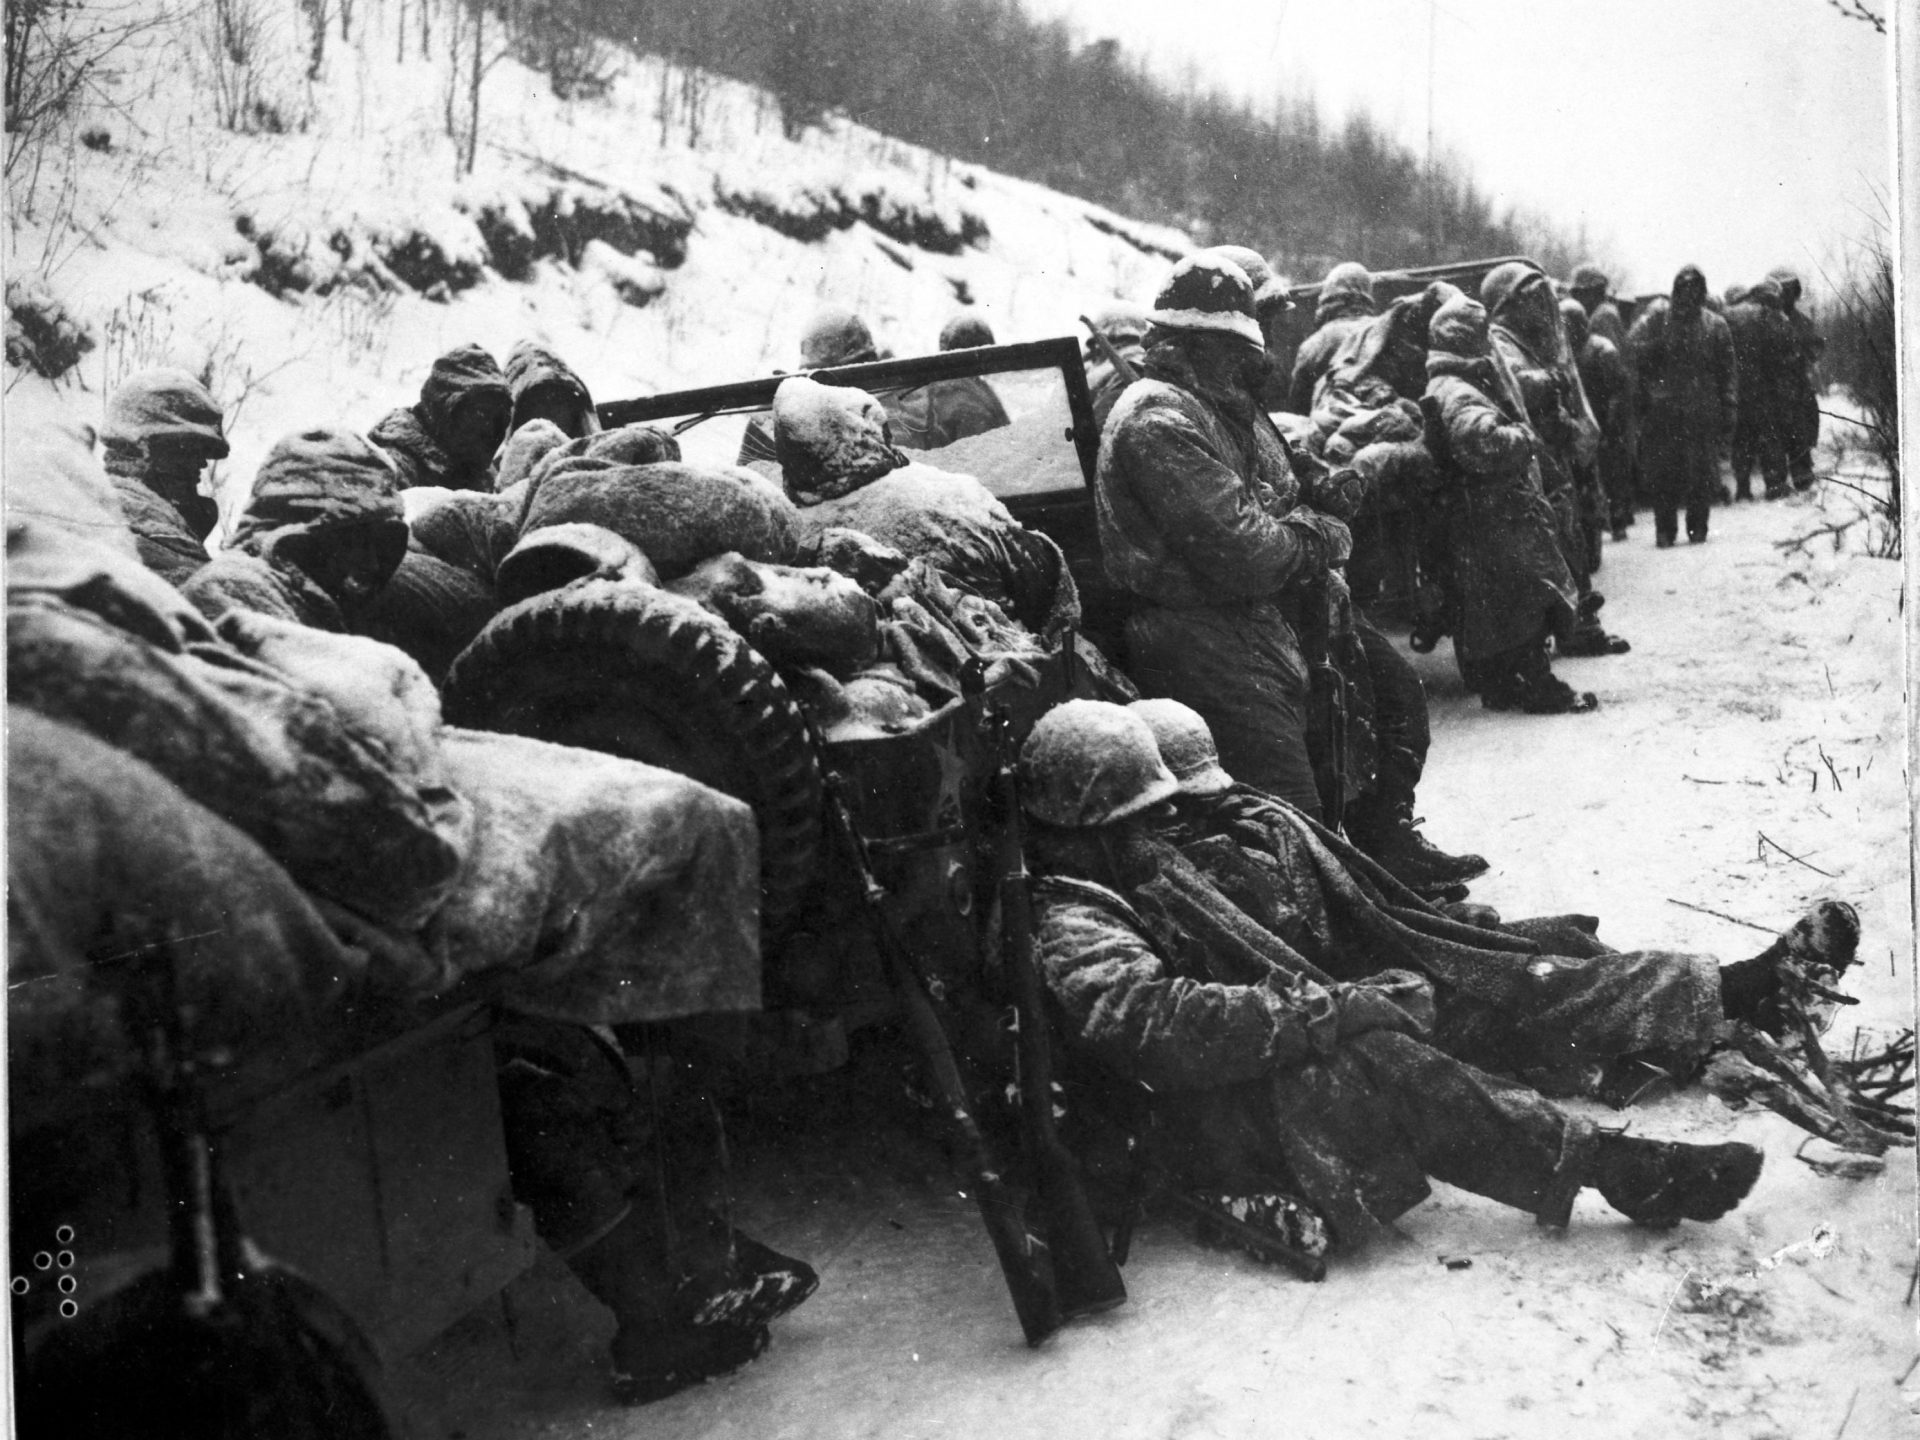 Marines of the 5th and 7th regiments who hurled back a surprise onslaught by three Chinese communist divisions wait to withdraw from the Chosin Reservoir area circa December 1950.